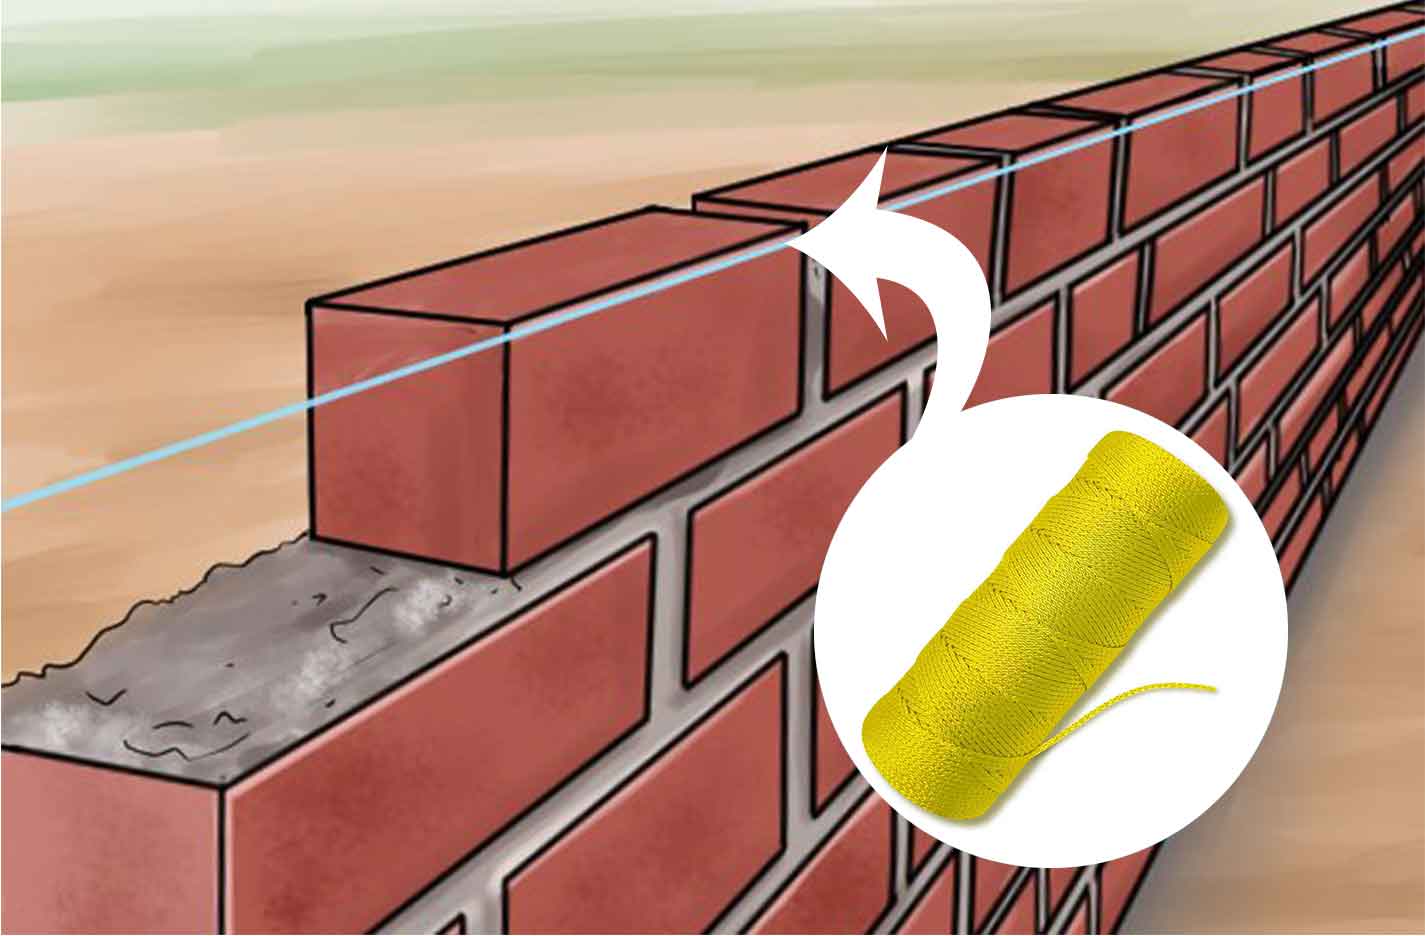 String line in brick work - Construction tools and equipment with names